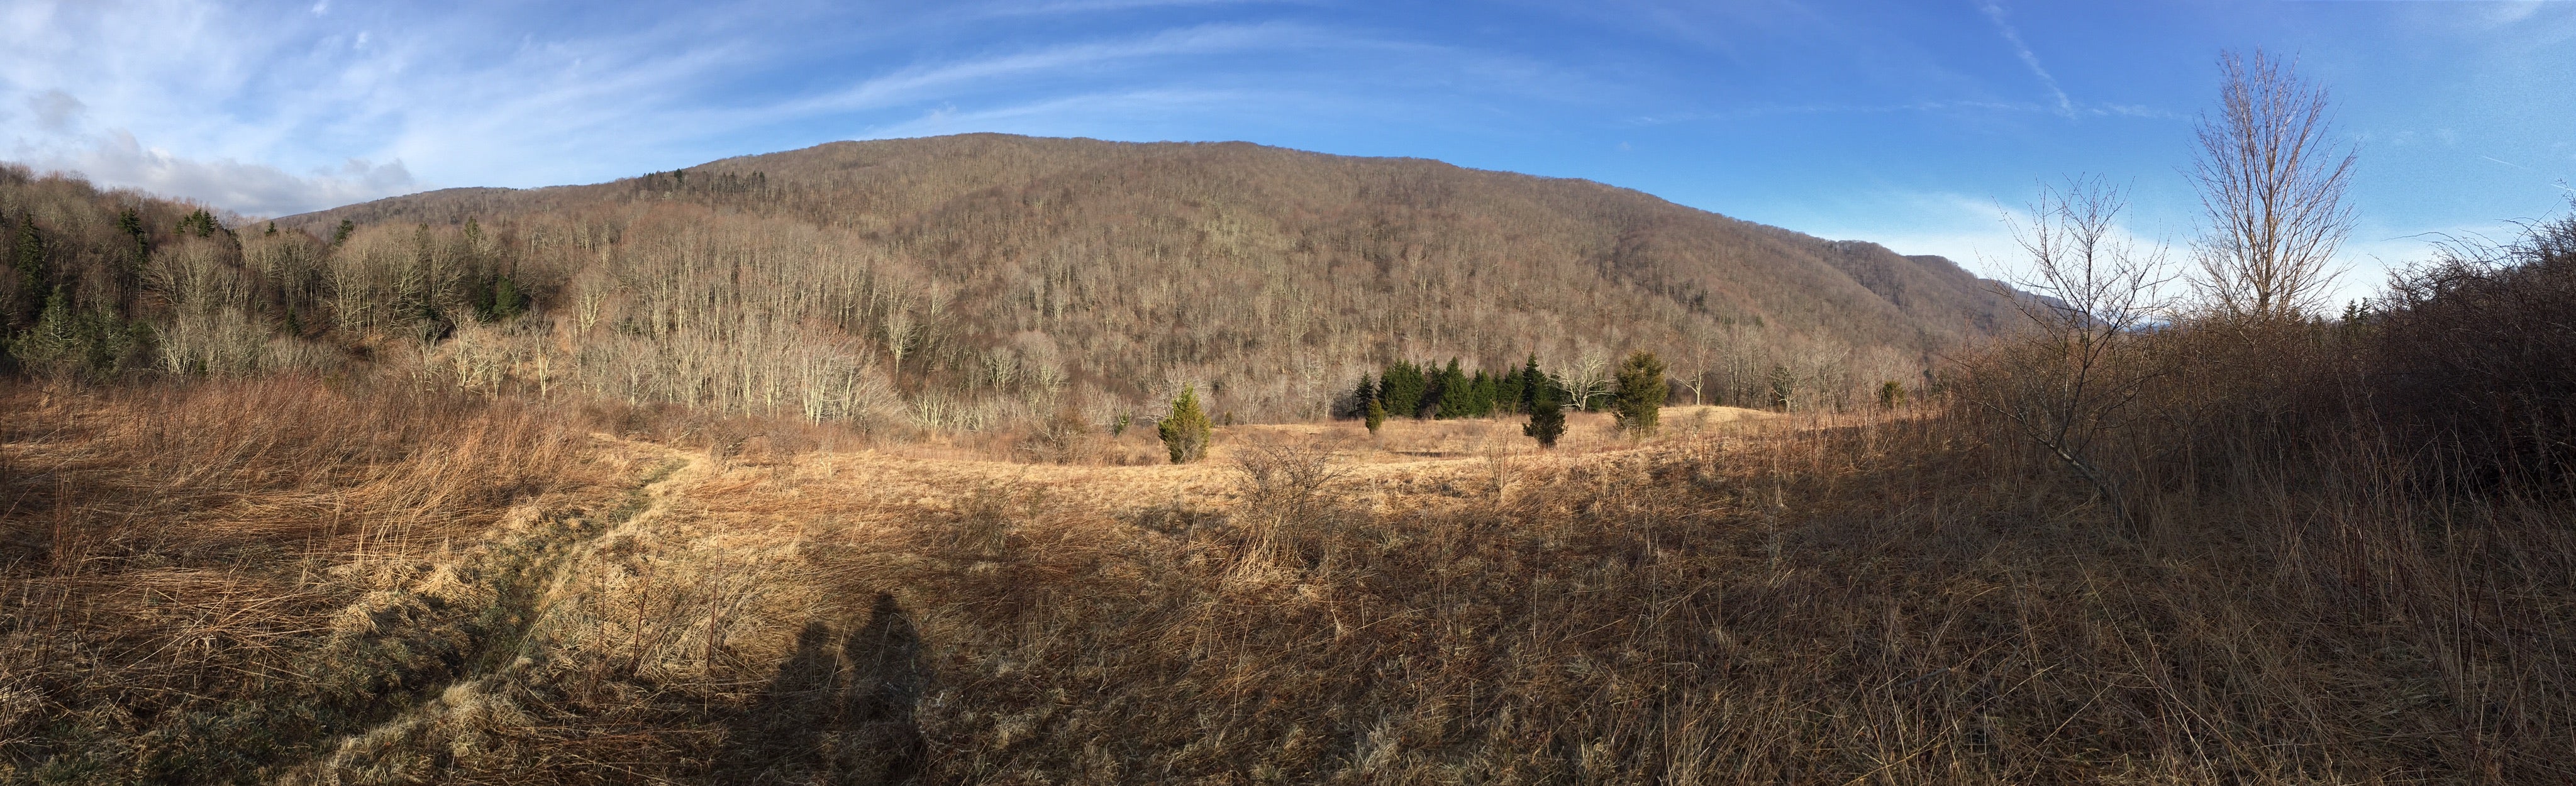 Panorama from High Meadows Trail